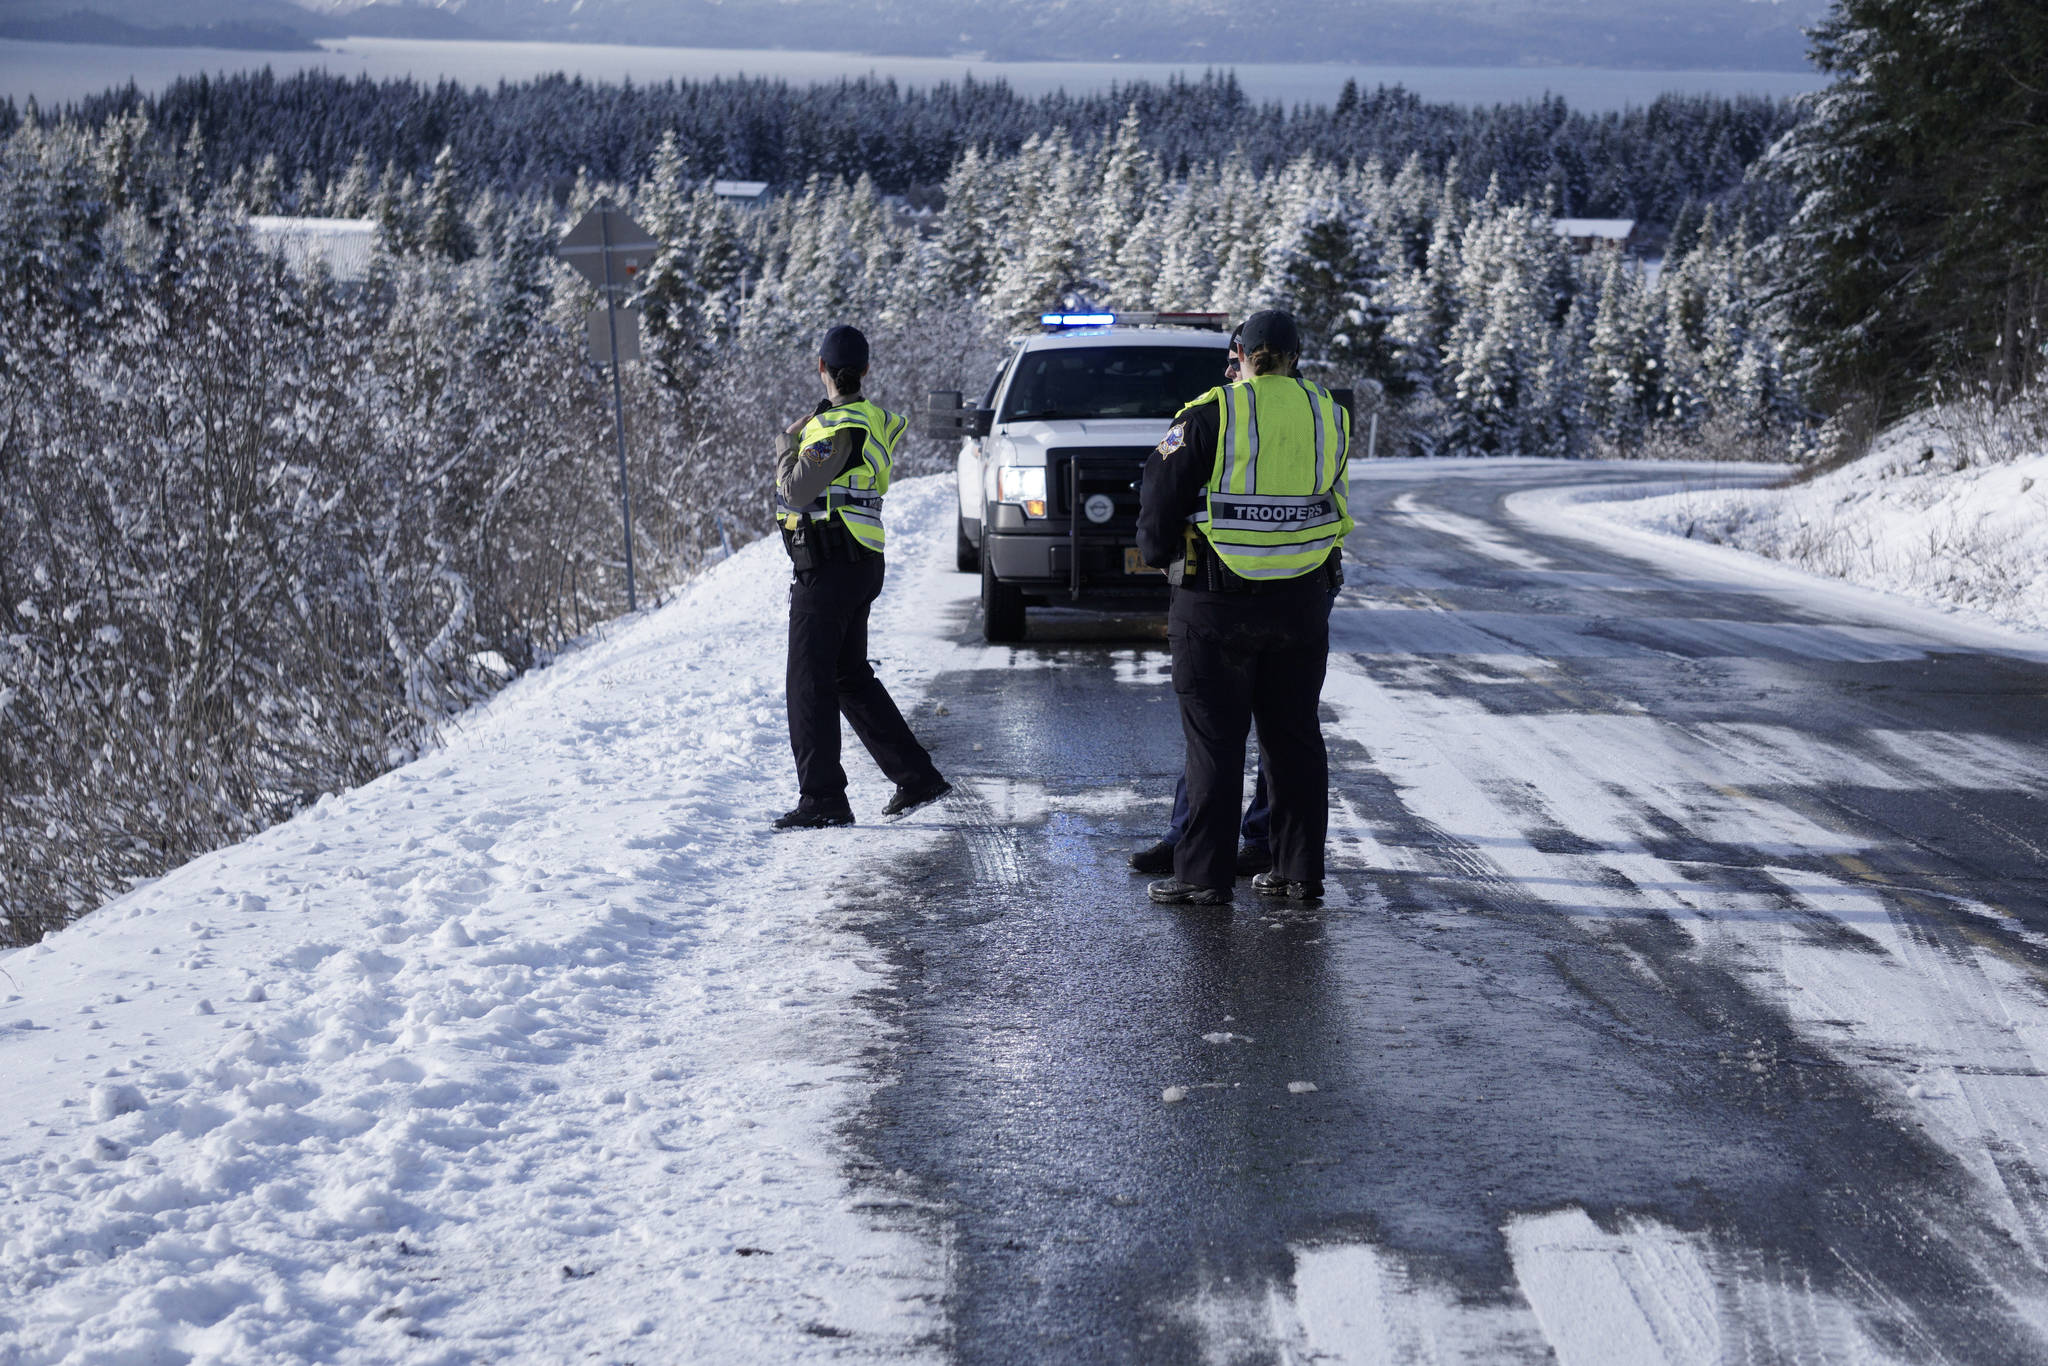 Alaska State Troopers respond to a vehicle that went over the edge of Diamond Ridge Road on Monday morning, April 22, 2019, in Homer, Alaska. A sport utility vehicle failed to make a turn heading south and went down the side of a stretch of road known by locals as Beck’s Hill. No one was injured in the crash. (Photo by Michael Armstrong/Homer News)